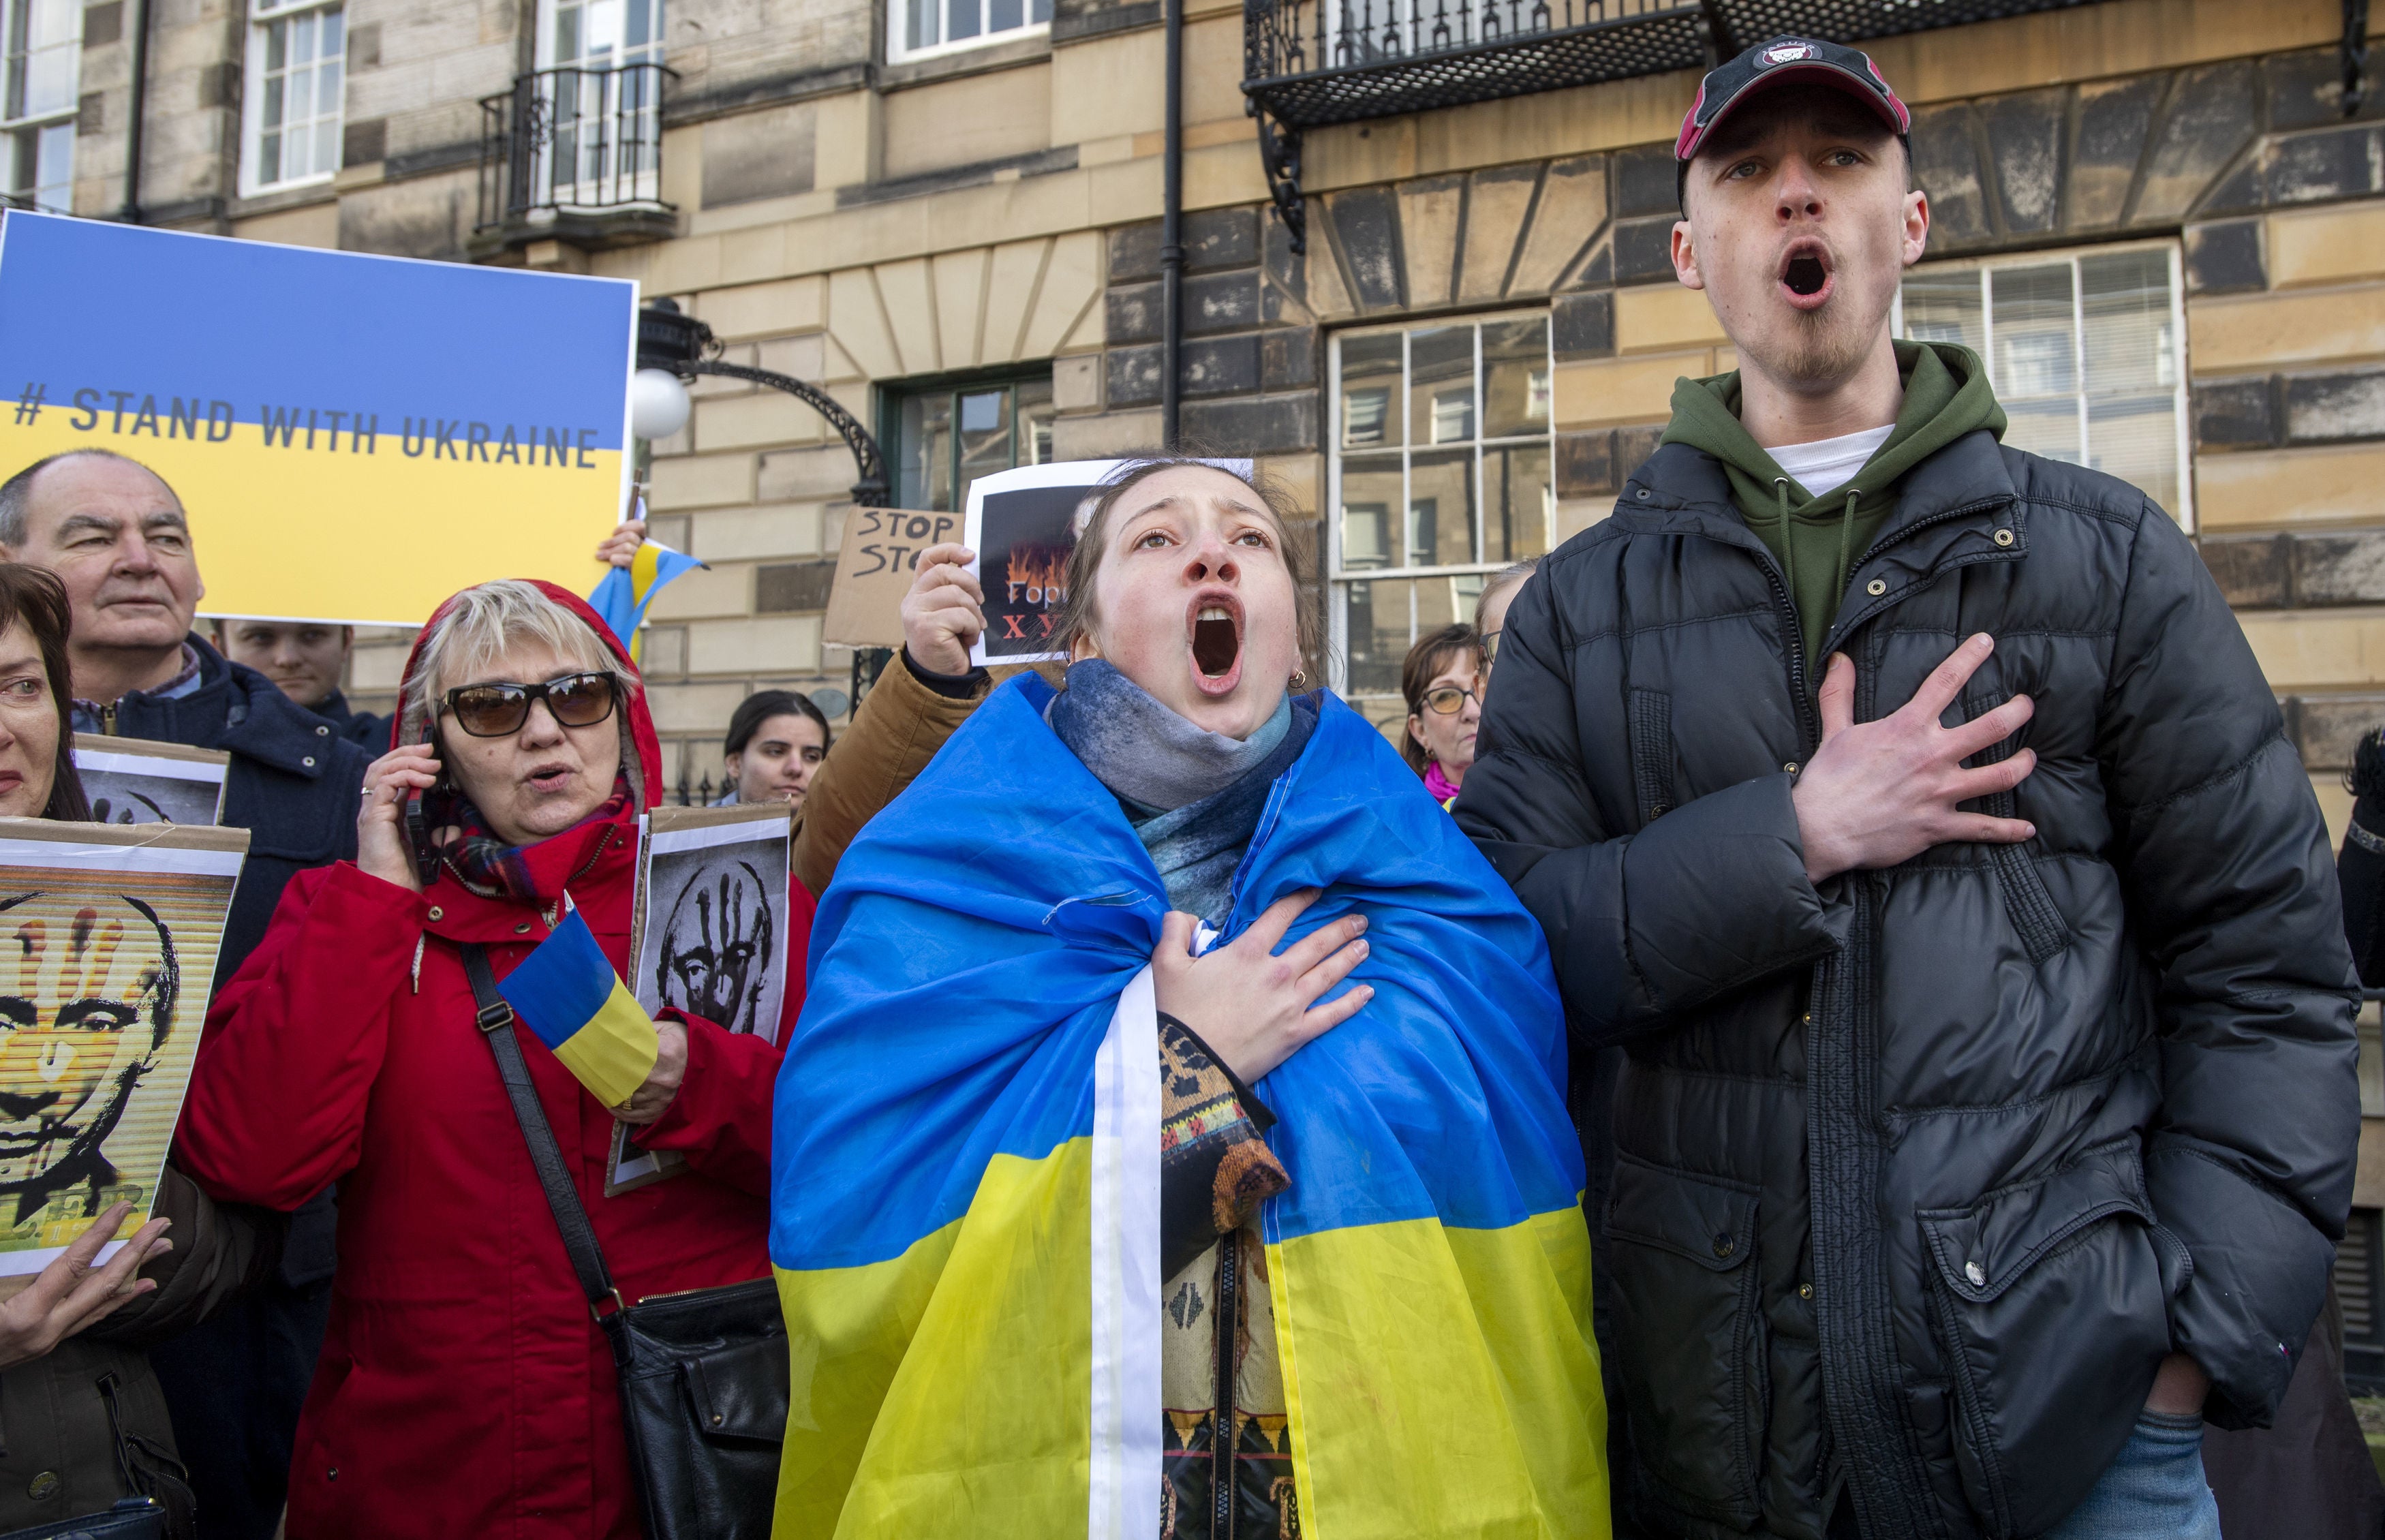 People take part in a demonstration outside the Russian consulate general in Edinburgh, following the Russian invasion of Ukraine (Lesley Martin/PA)